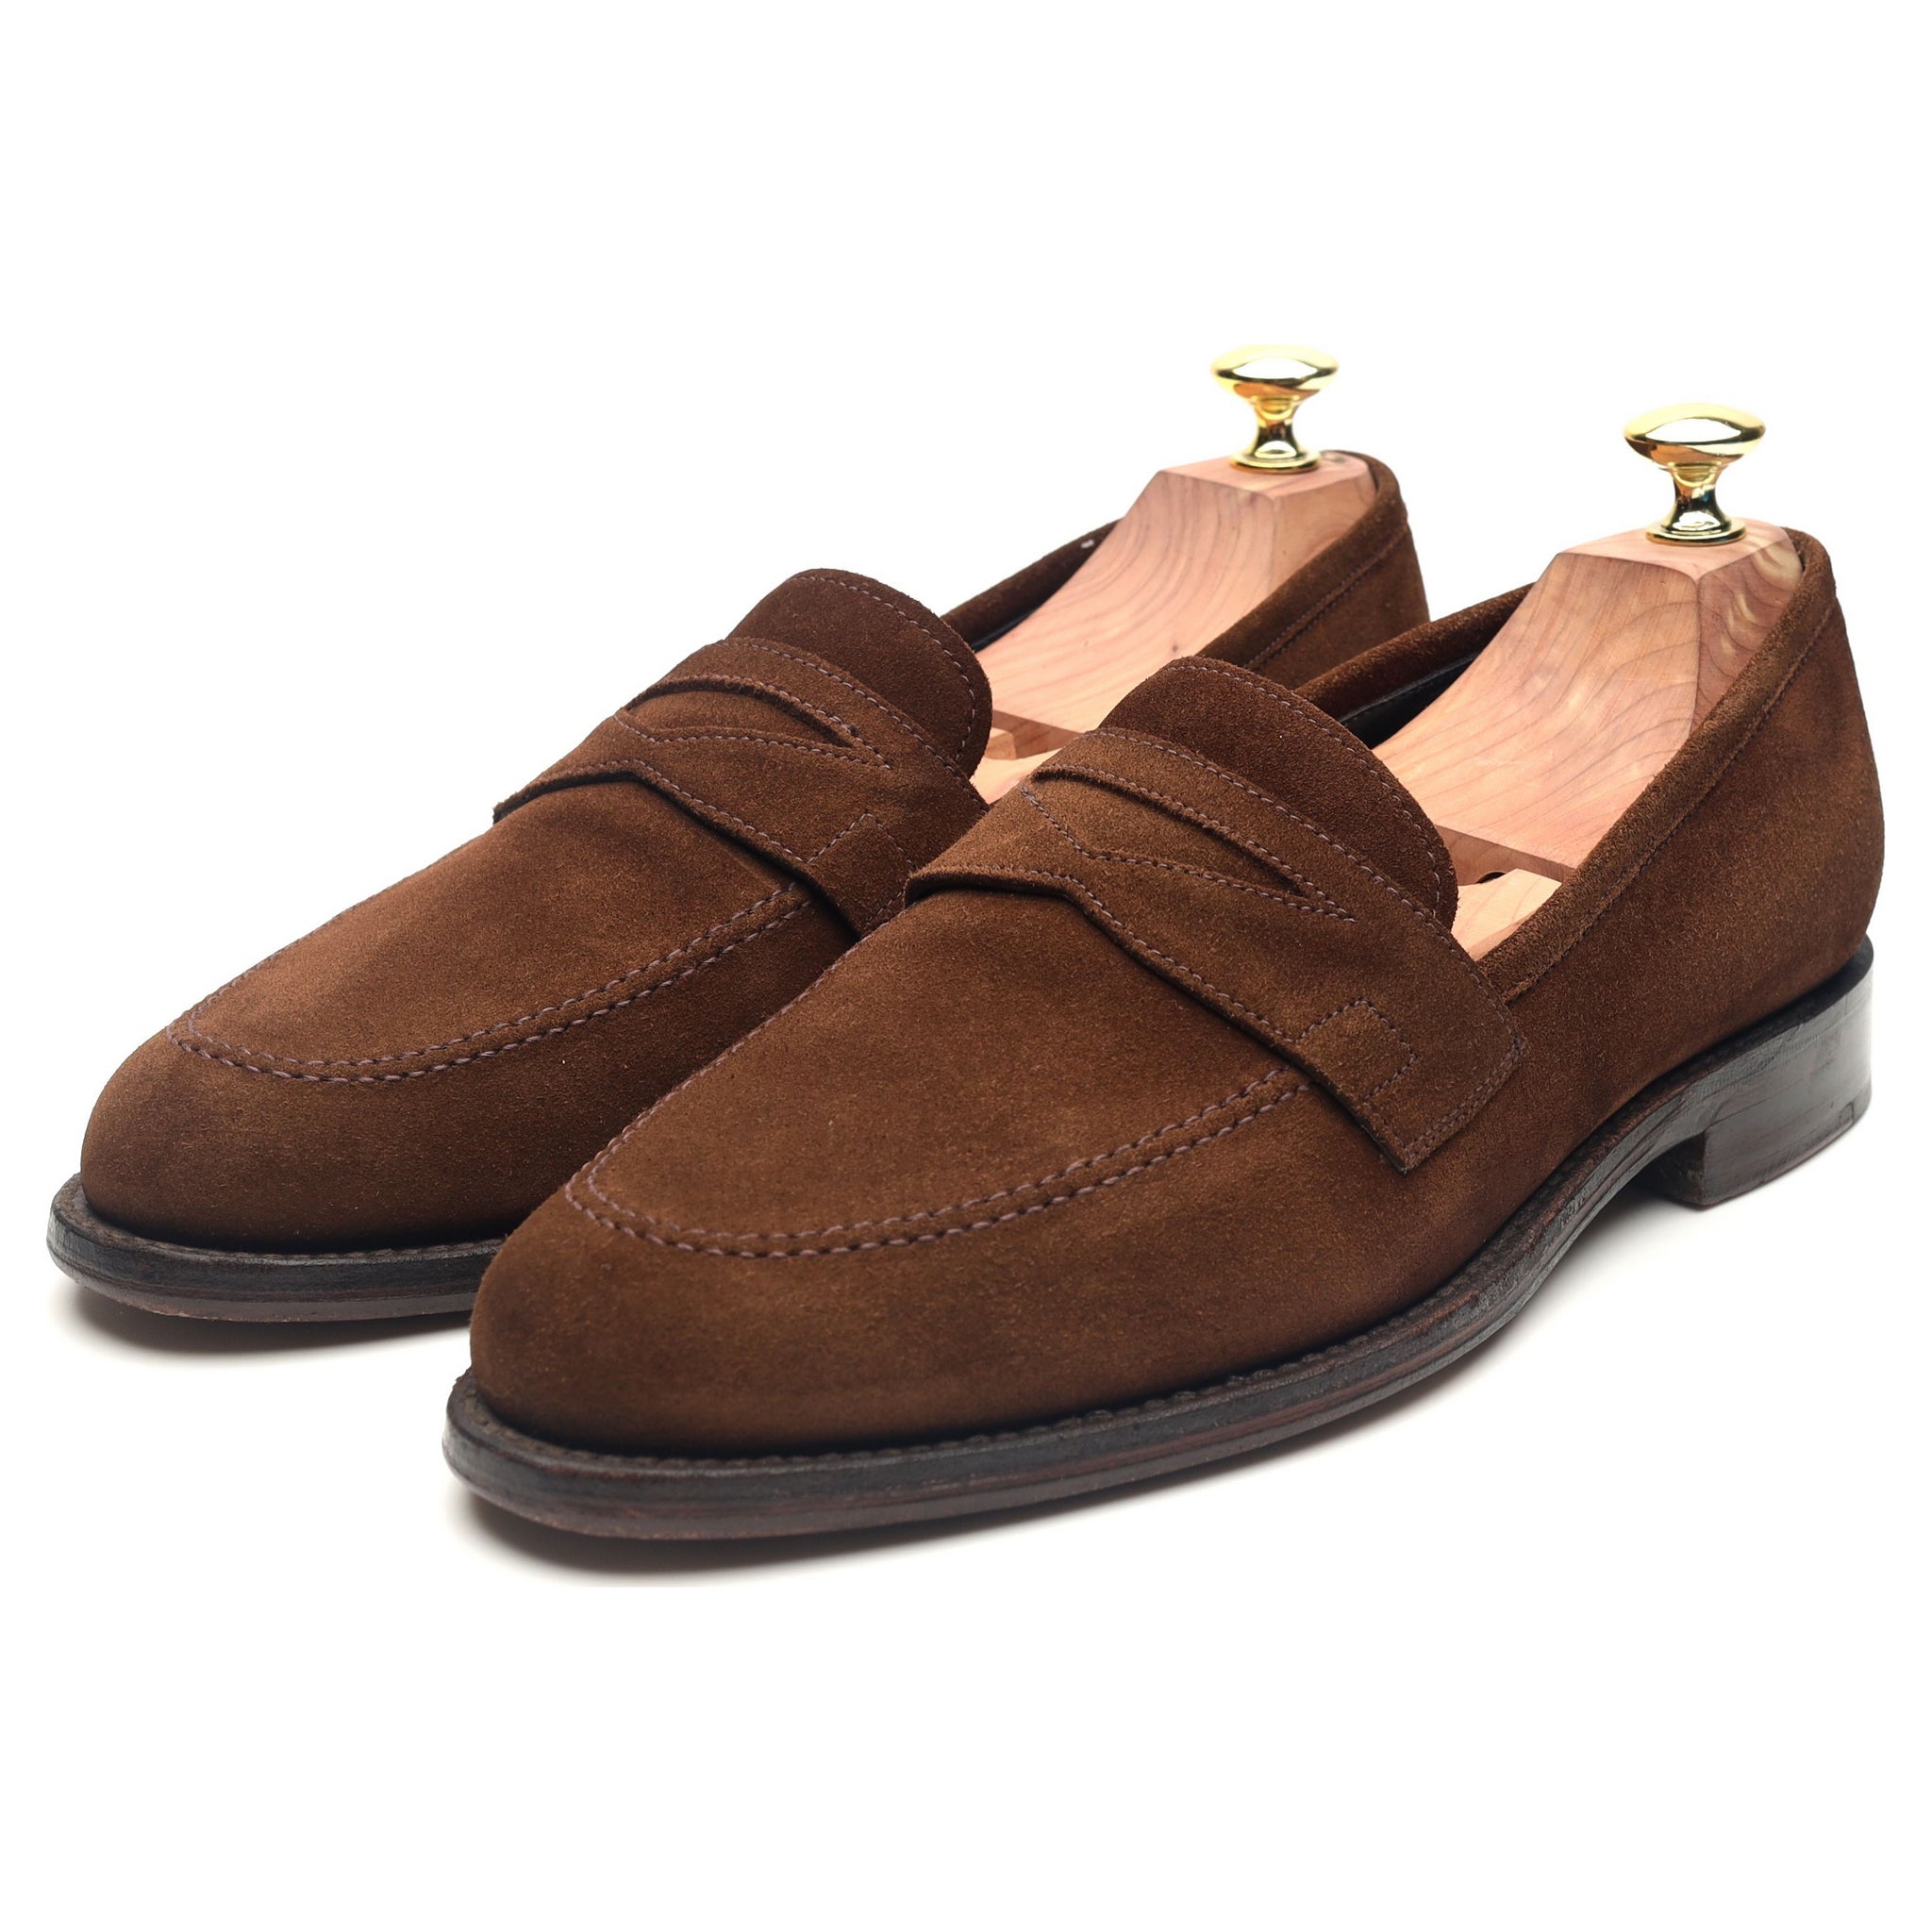 Charlton' Brown Suede Loafers UK 7 F - Abbot's Shoes